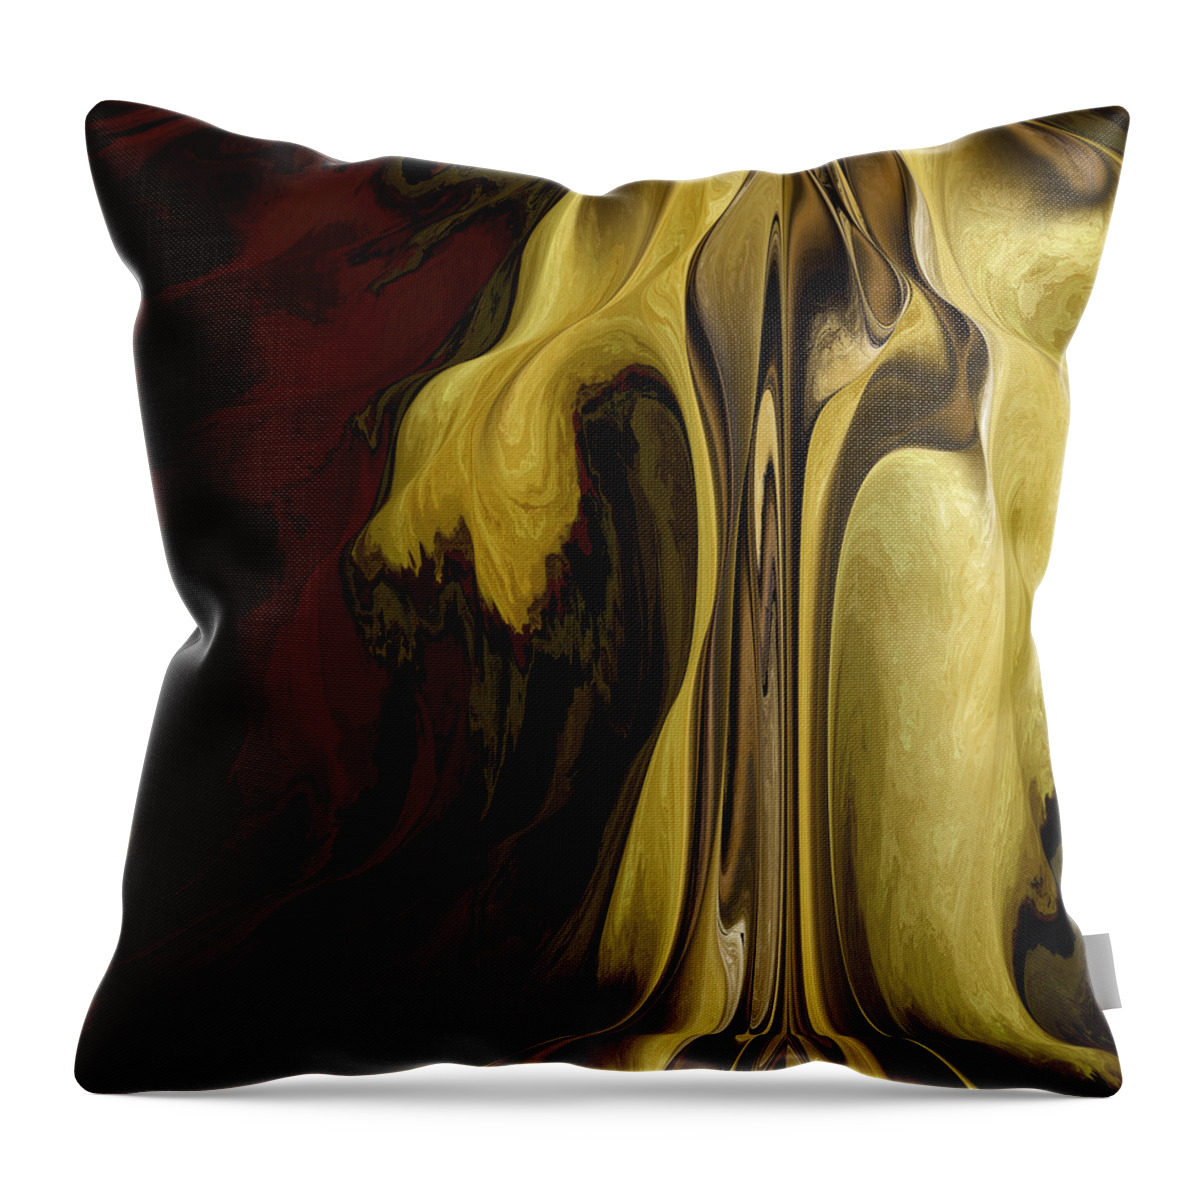 Vic Eberly Throw Pillow featuring the digital art Night Winds by Vic Eberly